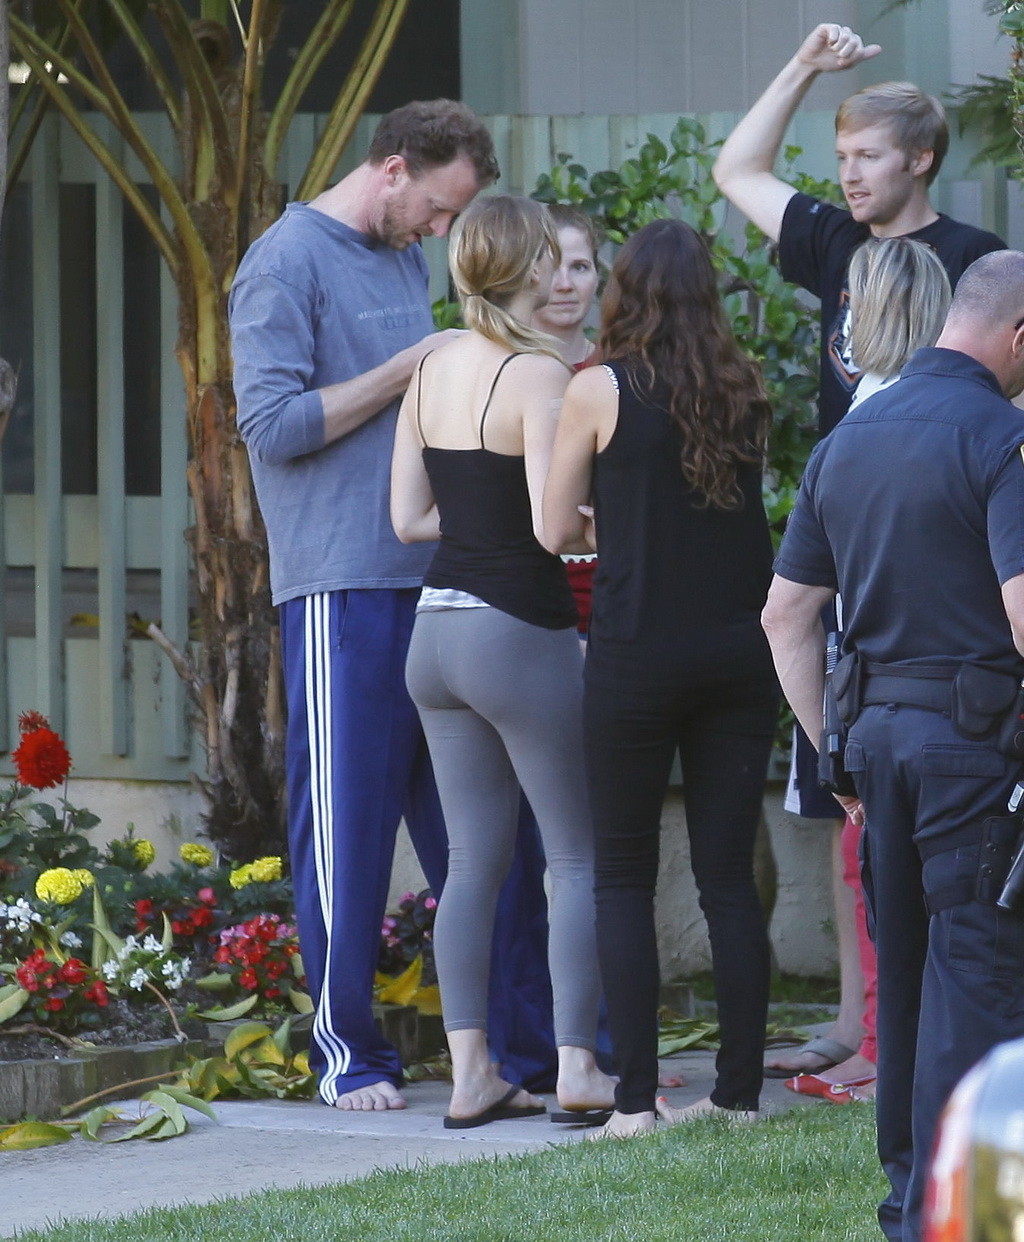 Jennifer Lawrence busty  booty in tights  top in Santa Monica helping a woman wh #75259254